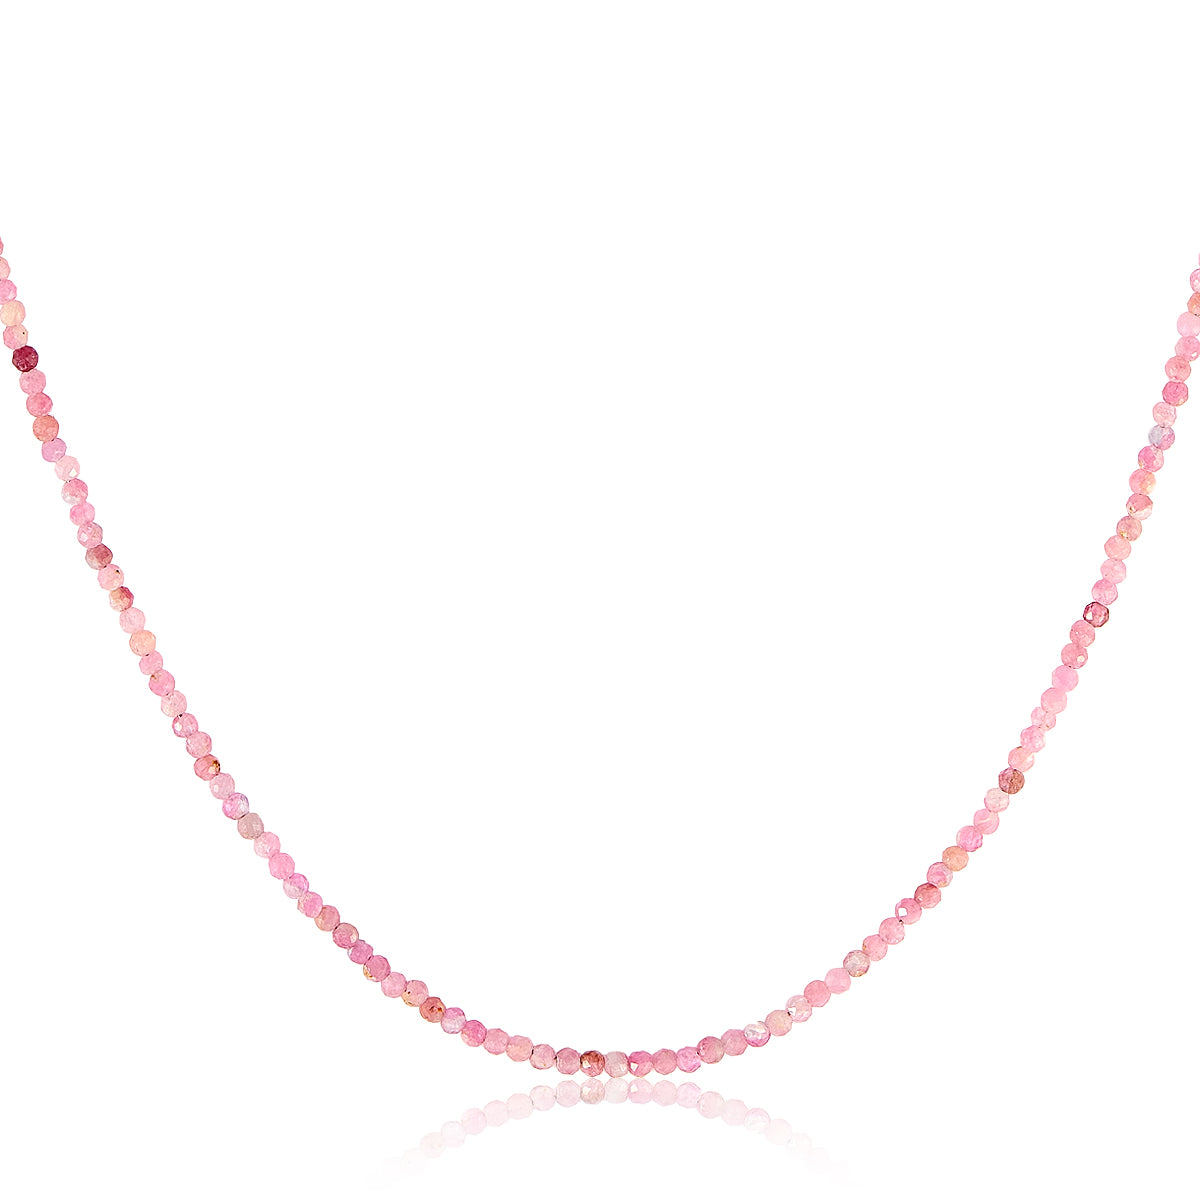 PINK TOURMALINE NECKLACE WITH SILVER CLASP